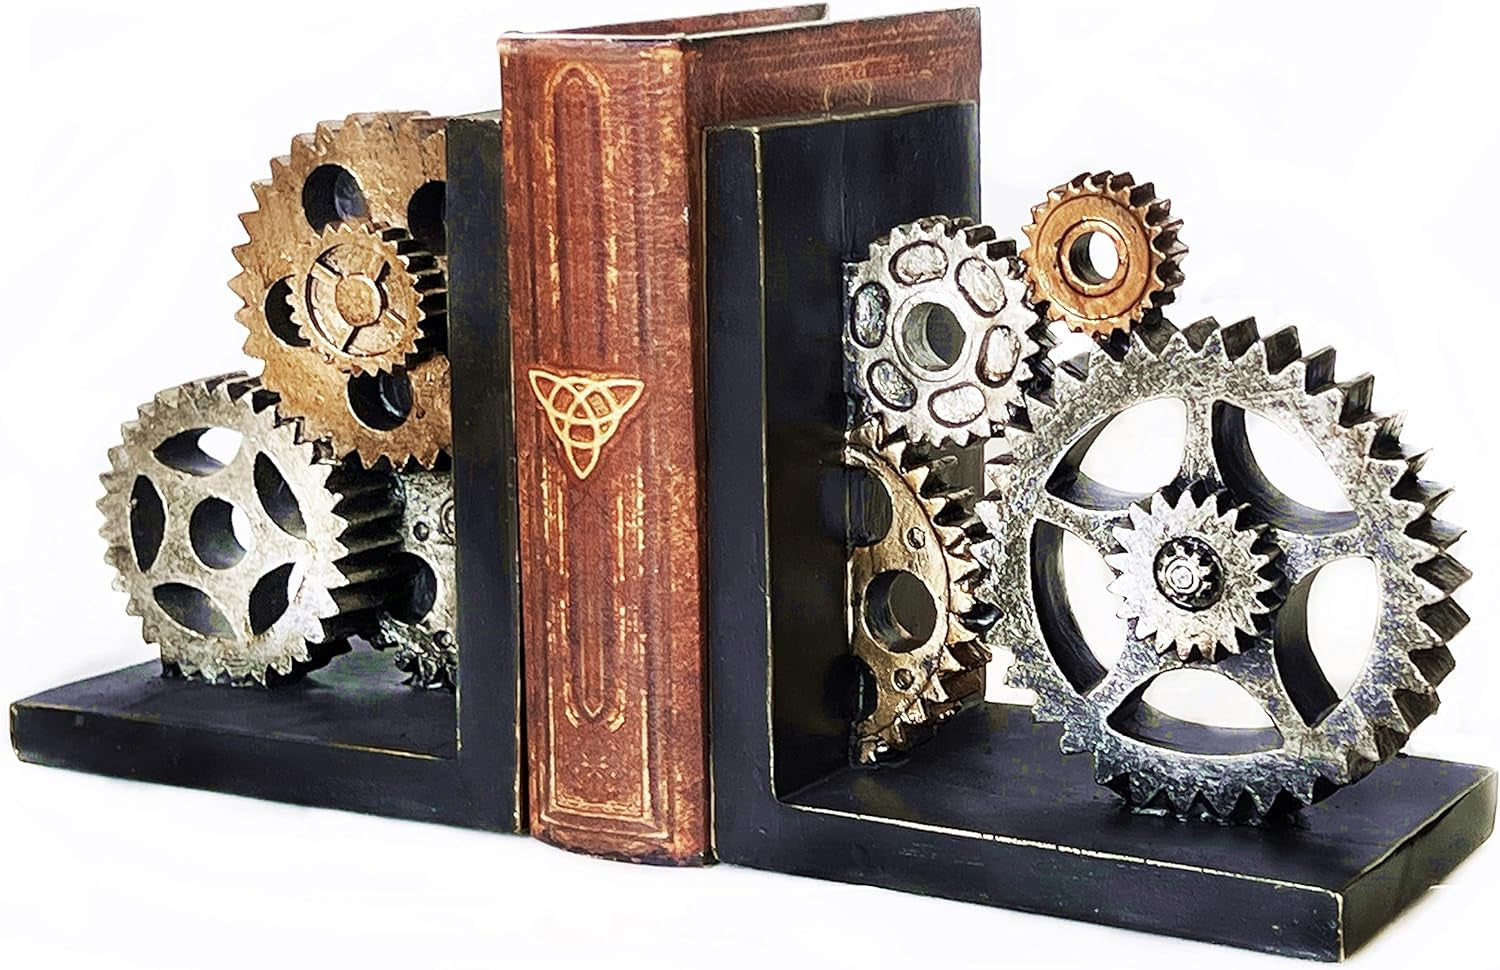 20881 Decorative Bookends Gear Book Shelves Stoppers Holder Nonskid Shelf Heavy Ends Supports Vintage Industrial Modern Art Home Decor Statues Sculptures 6 Inch